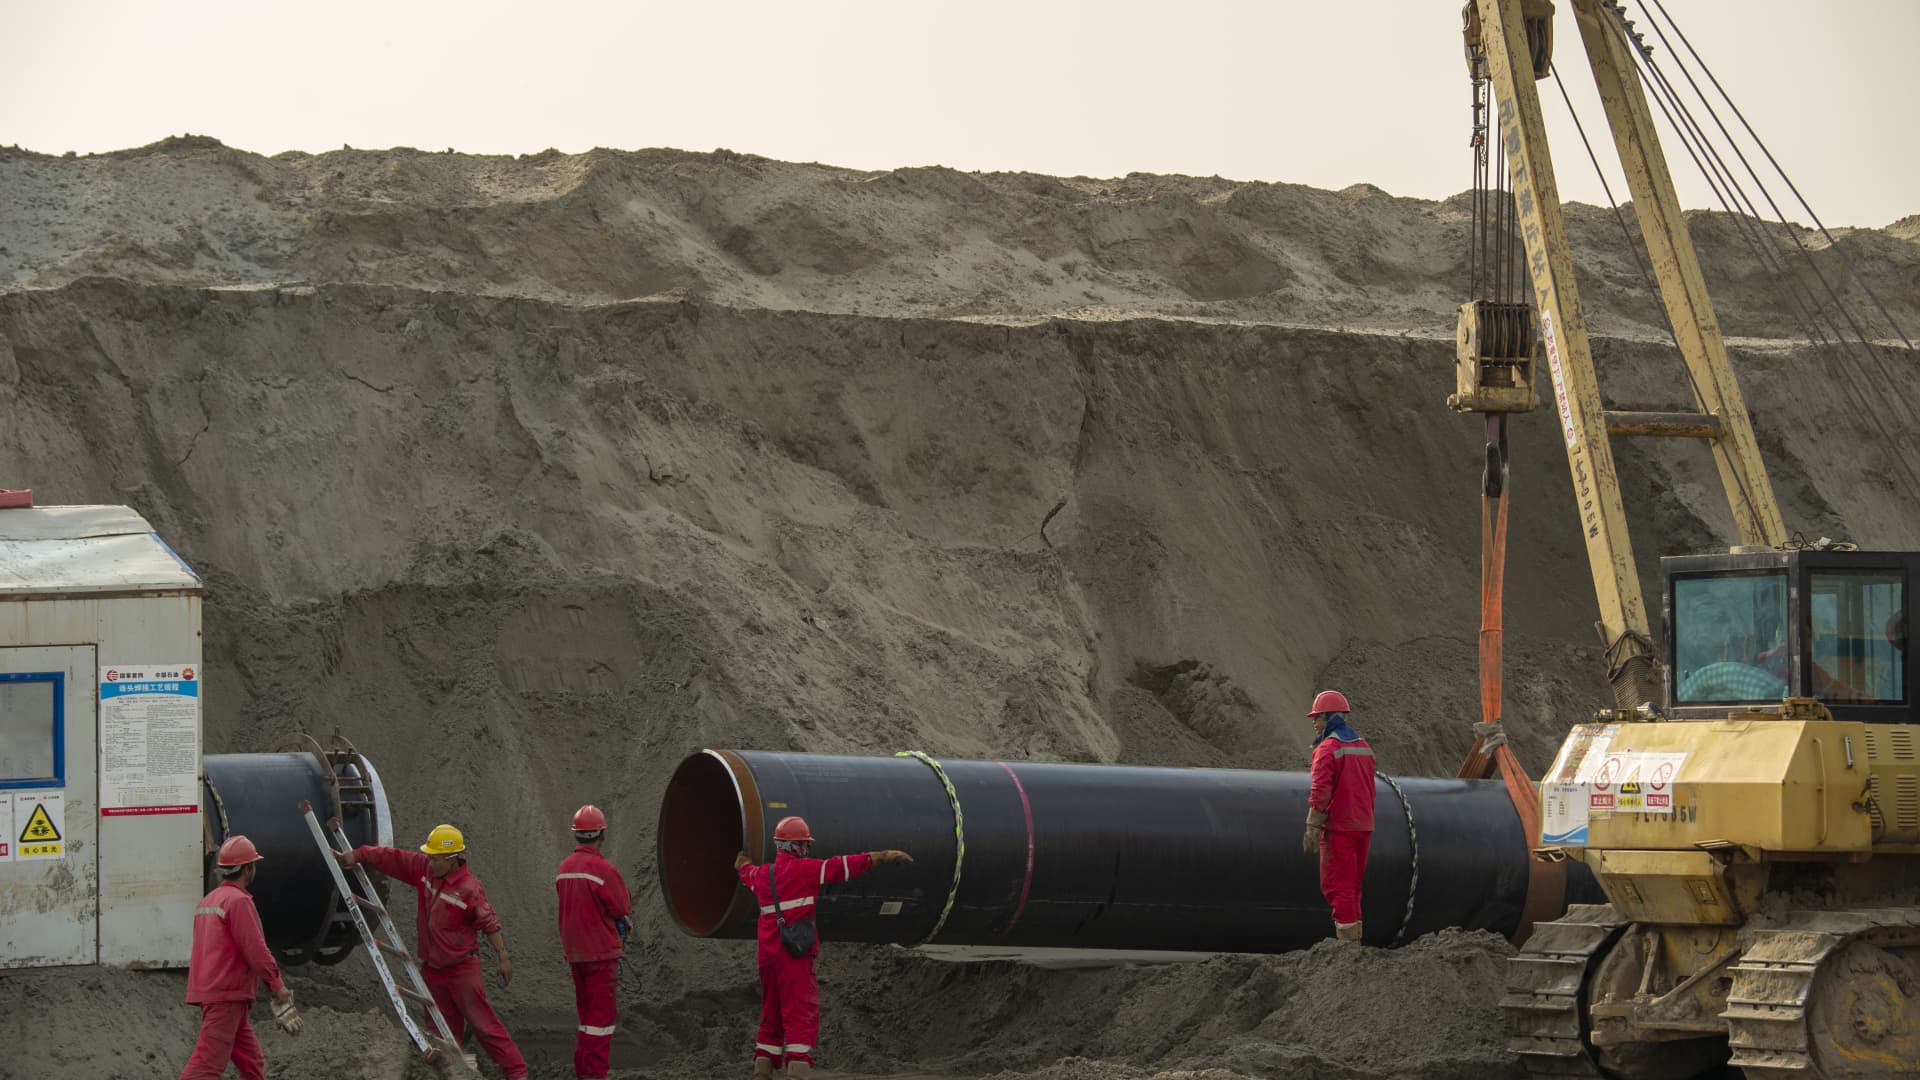 Construction on the China-Russia eastern natural gas pipeline project has moved far beyond provinces on the border, and extended to the eastern Chinese province of Jiangsu, pictured here on March 12, 2022.